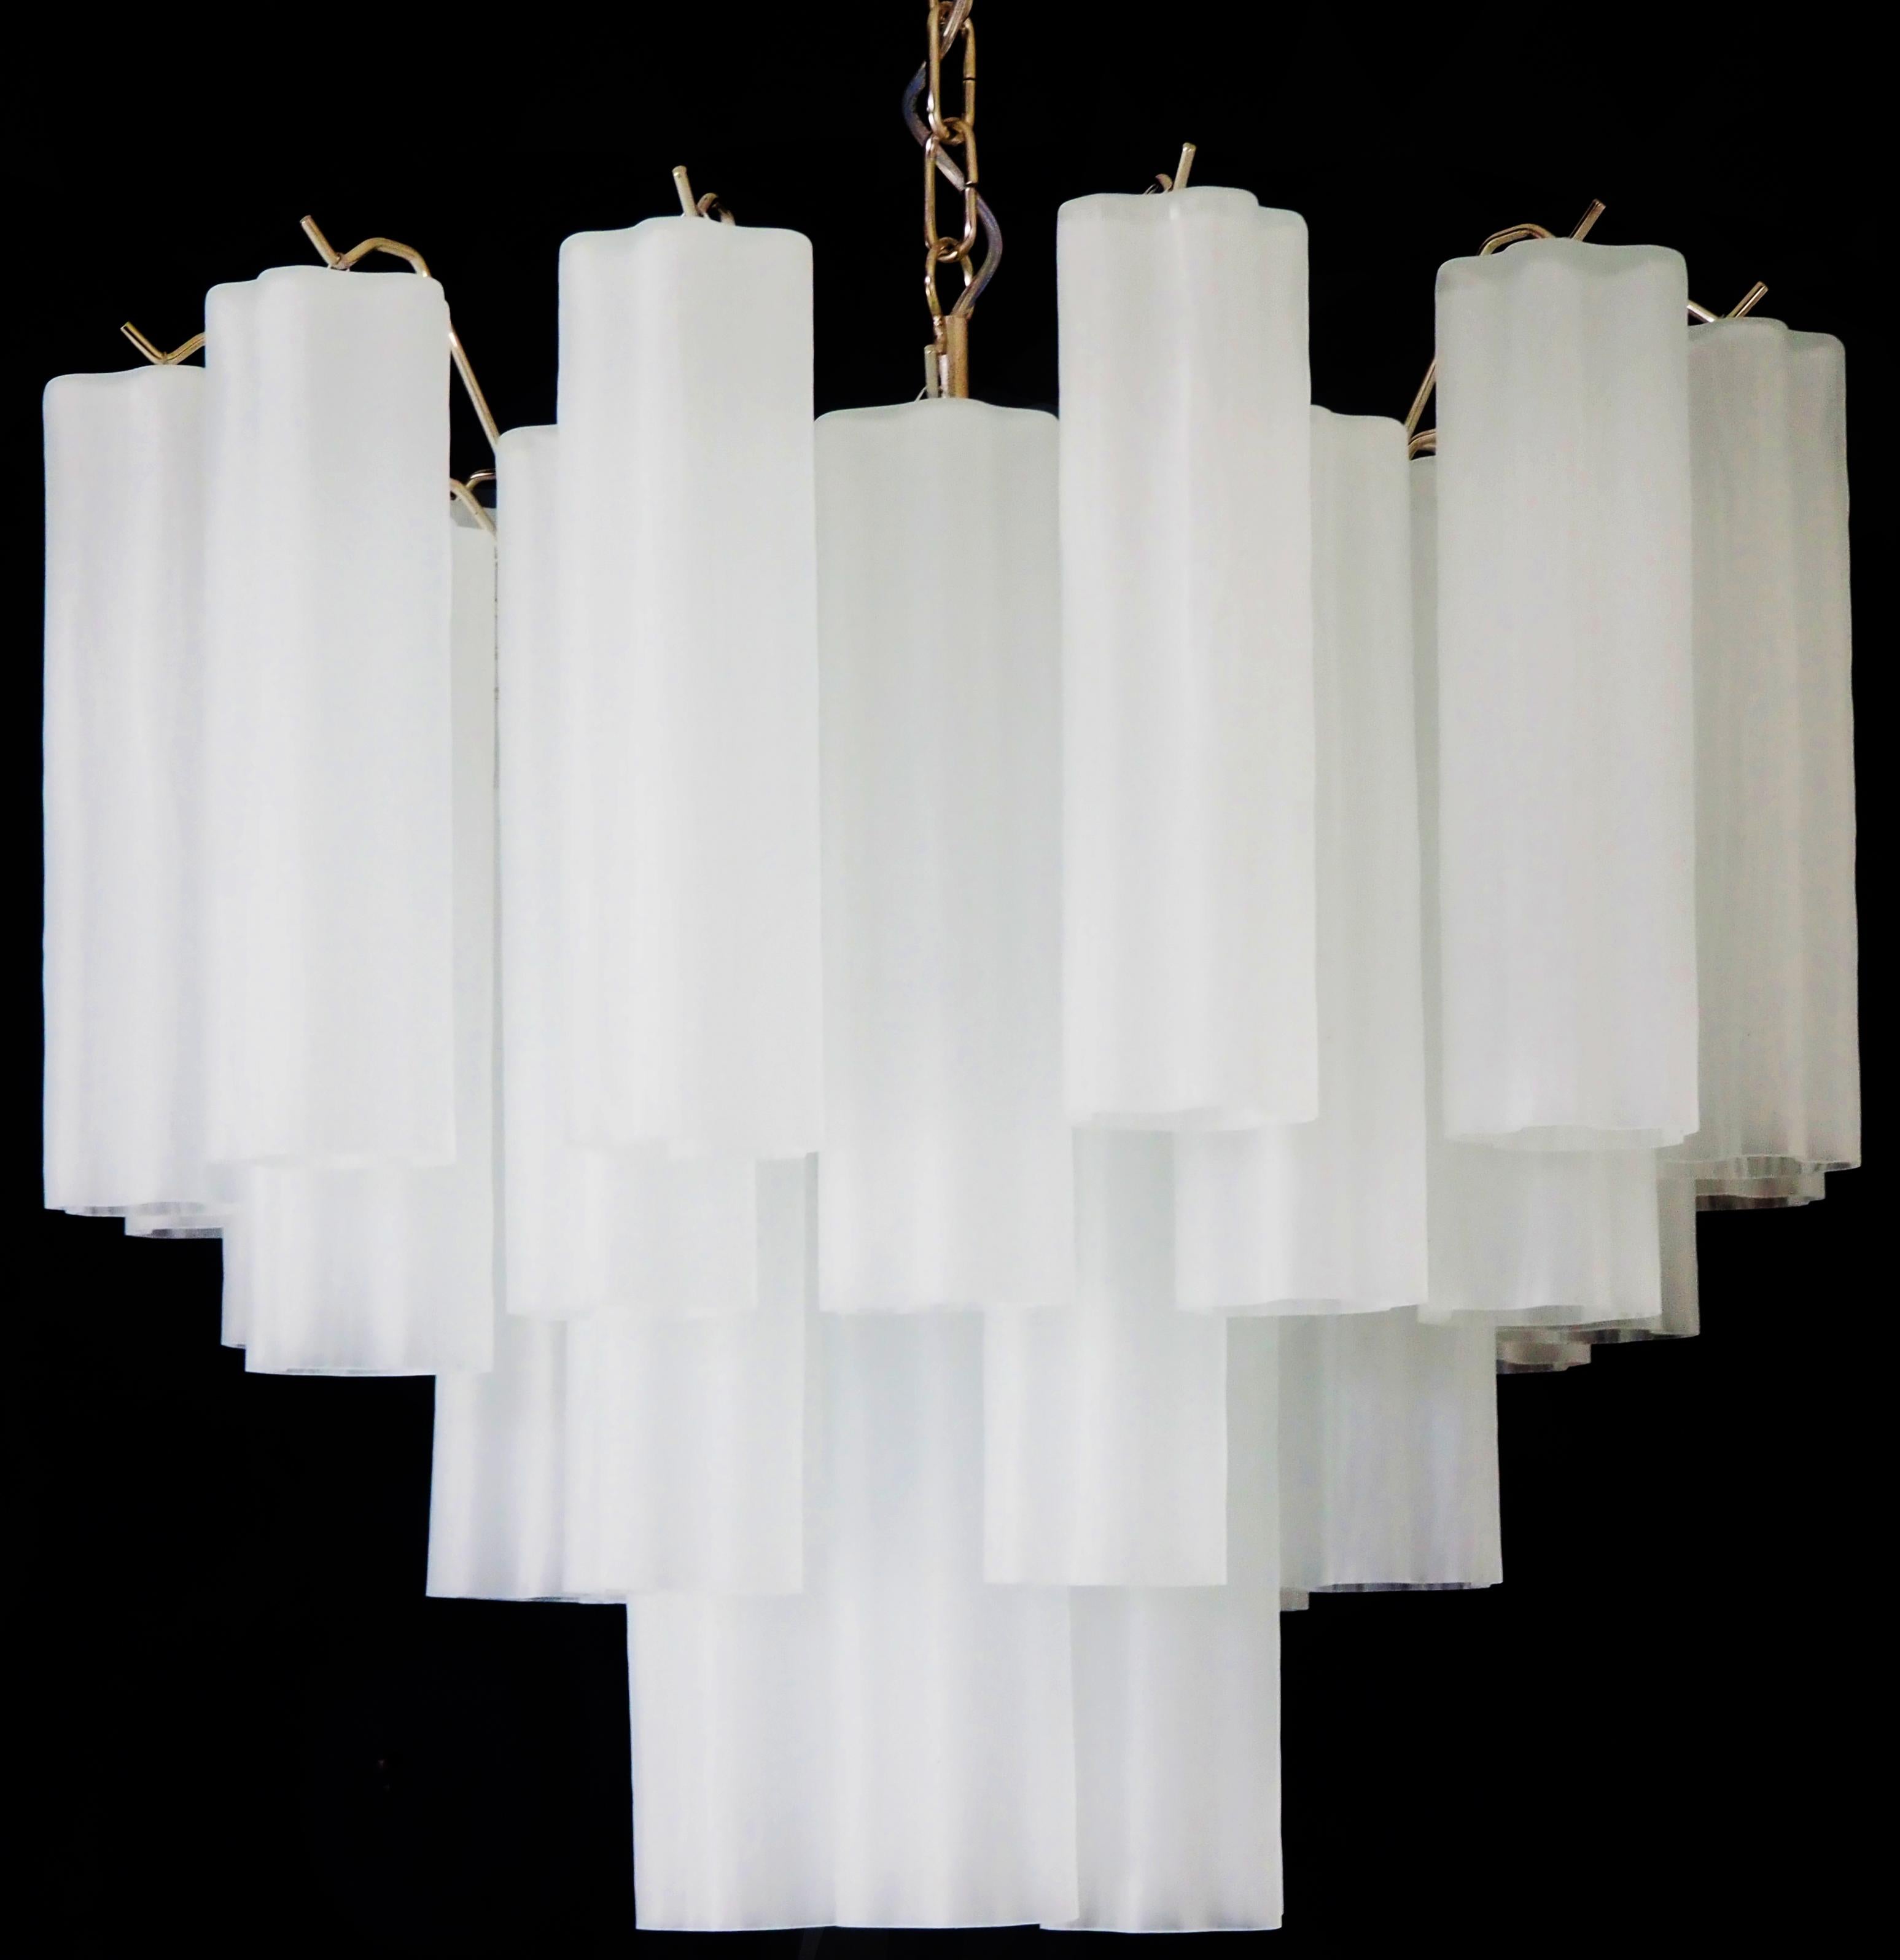 Gorgeous Murano Glass Tube Chandeliers - 36 etched glass tube For Sale 5